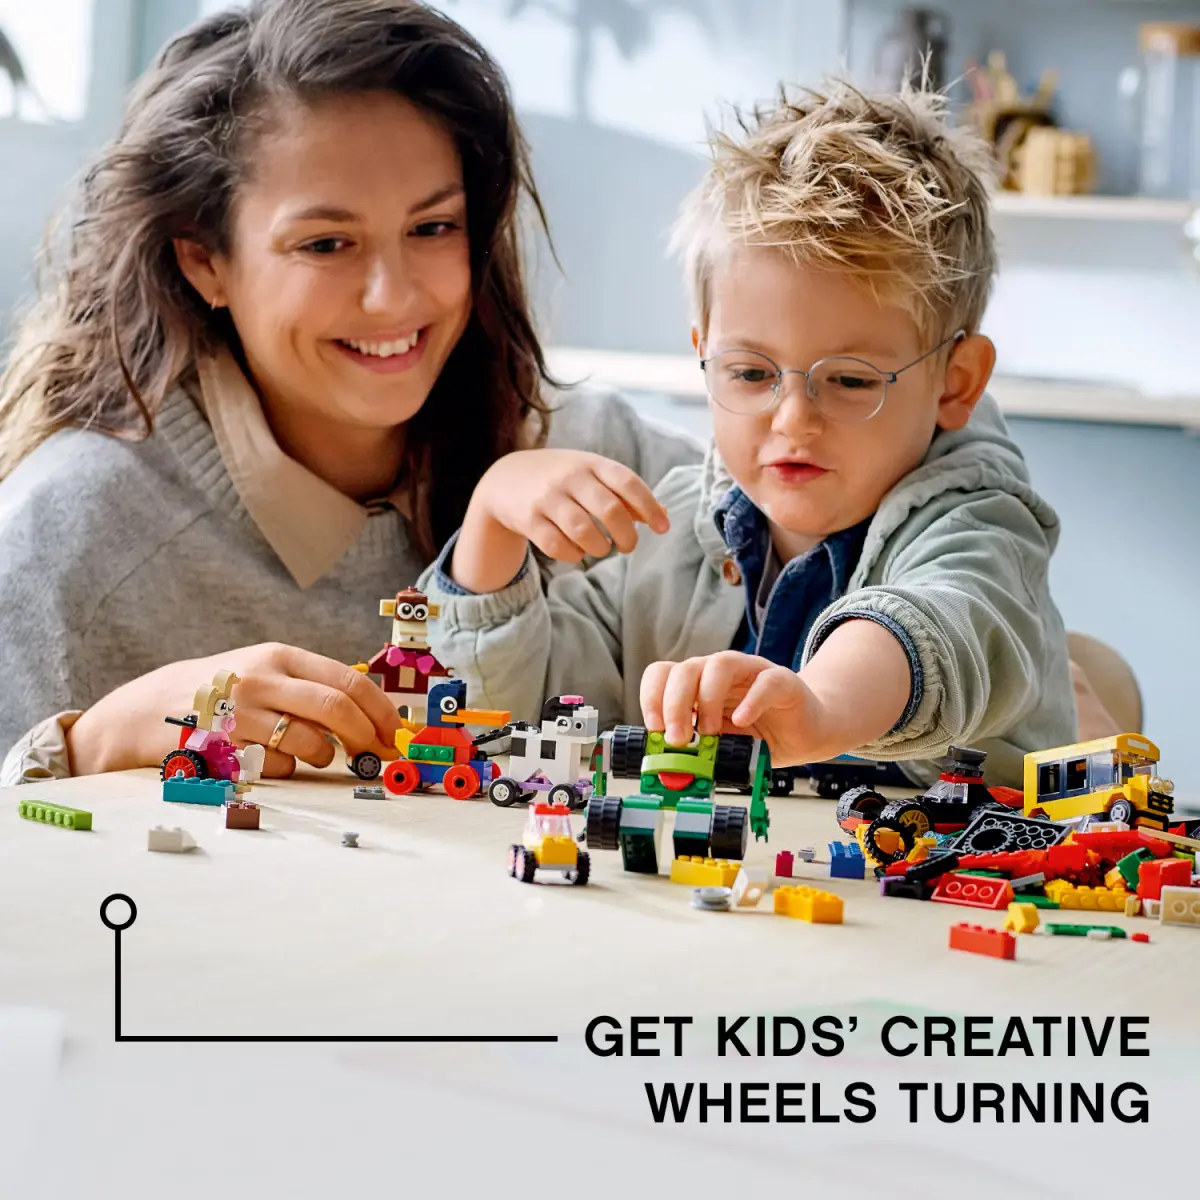 Lego Classic Bricks And Wheels 11014 Kids Building Kit (653 Pieces)